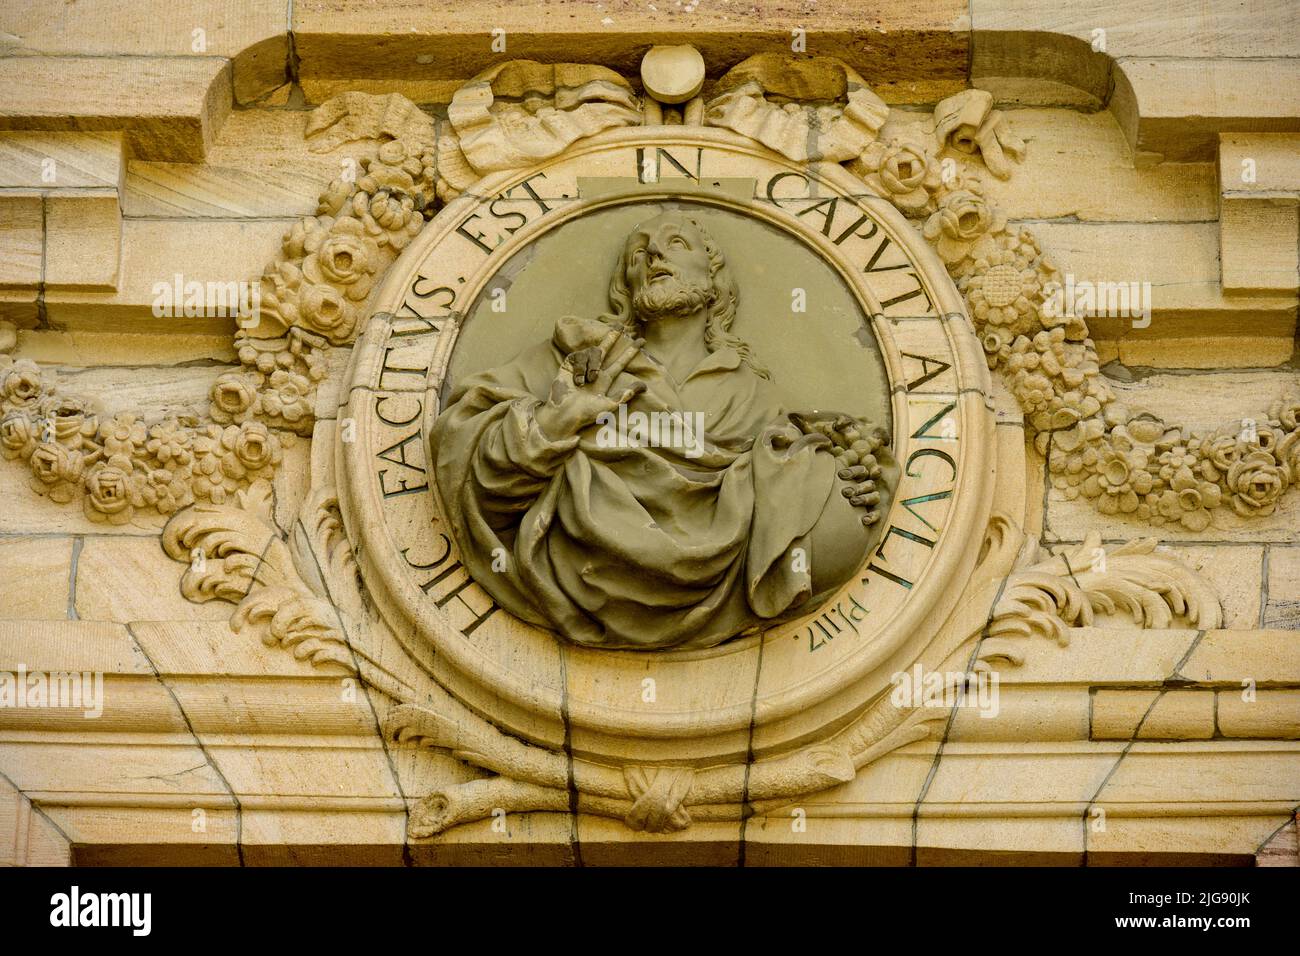 Germany, Baden-Württemberg, Black Forest, St. Blasien, Cathedral, oval medallion of the image of Salvator mundi above the main portal. Stock Photo